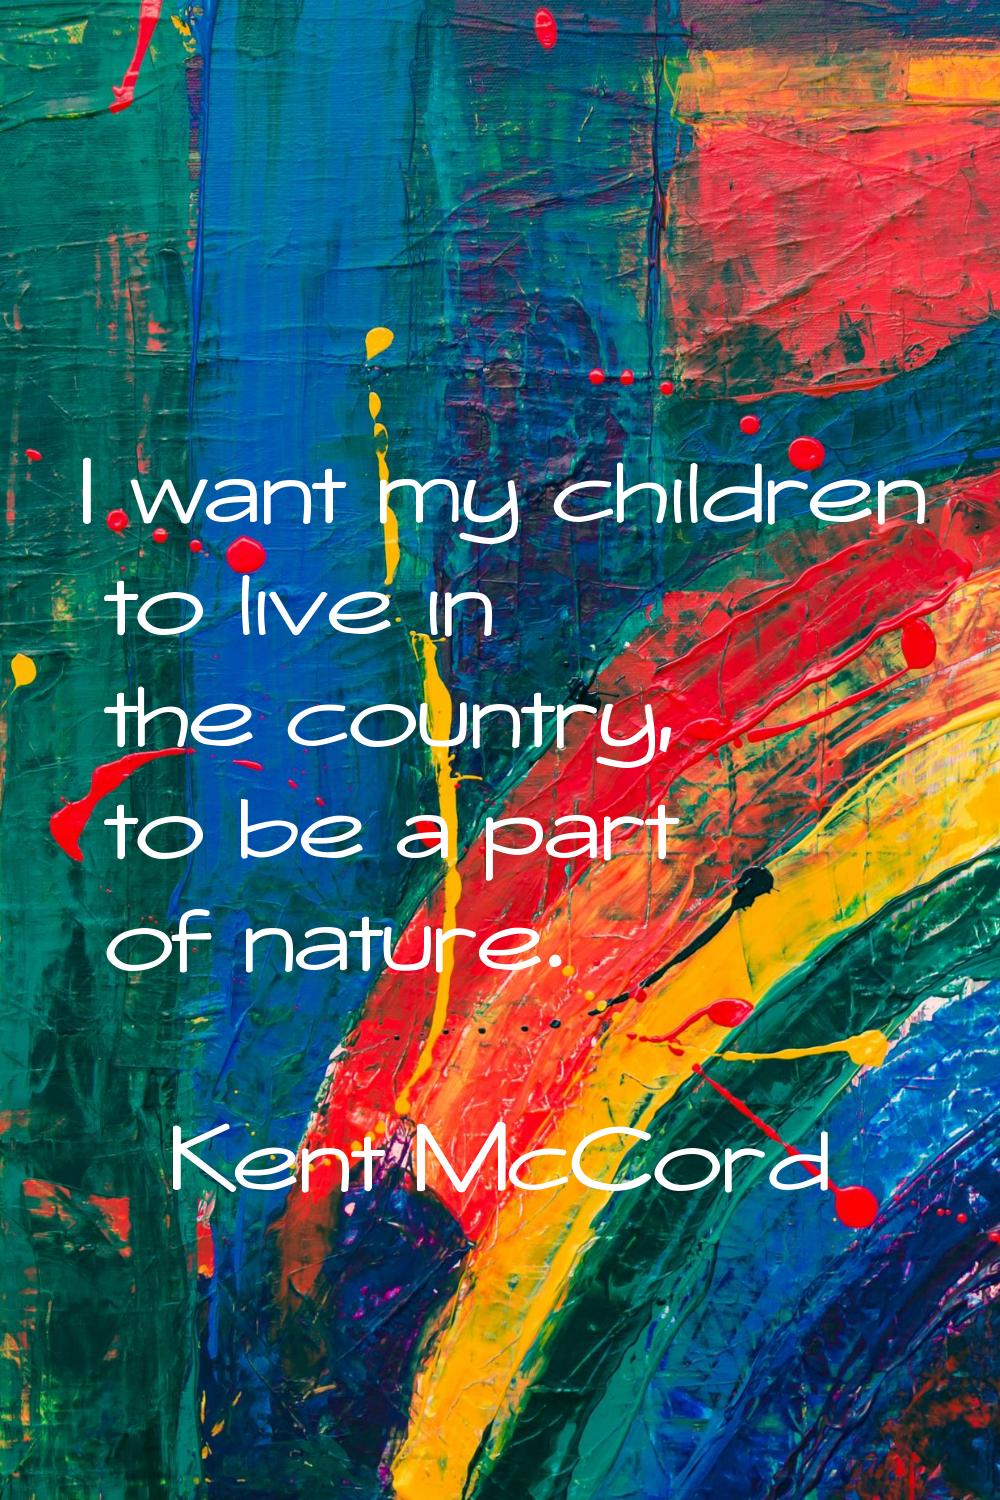 I want my children to live in the country, to be a part of nature.